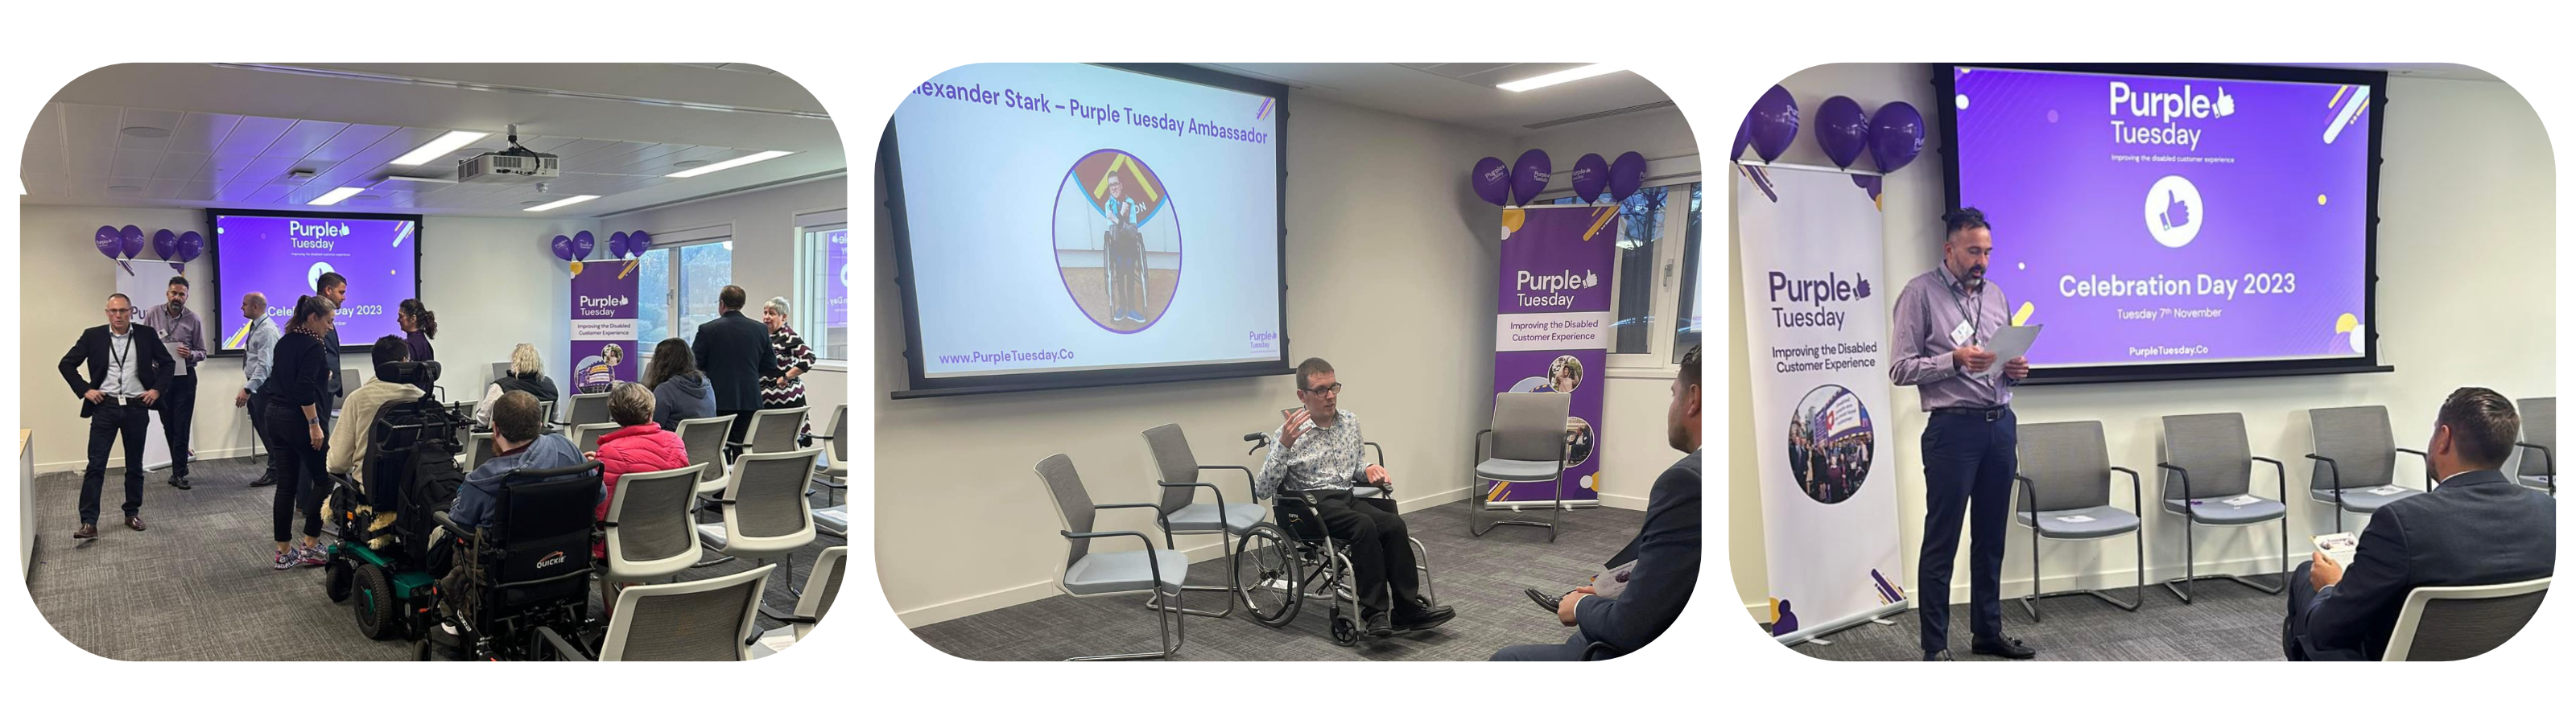 Three images combined, Image one is Individuals, both non-disabled and disabled, gathered in a room, all facing a screen displaying Purple Tuesday branding, image two is Alexander, seated in a wheelchair, presenting in front of a screen with Purple Tuesday branding and image three is Purple Tuesday staff delivering a speech in front of a screen adorned with Purple Tuesday branding and surrounded by purple balloons.